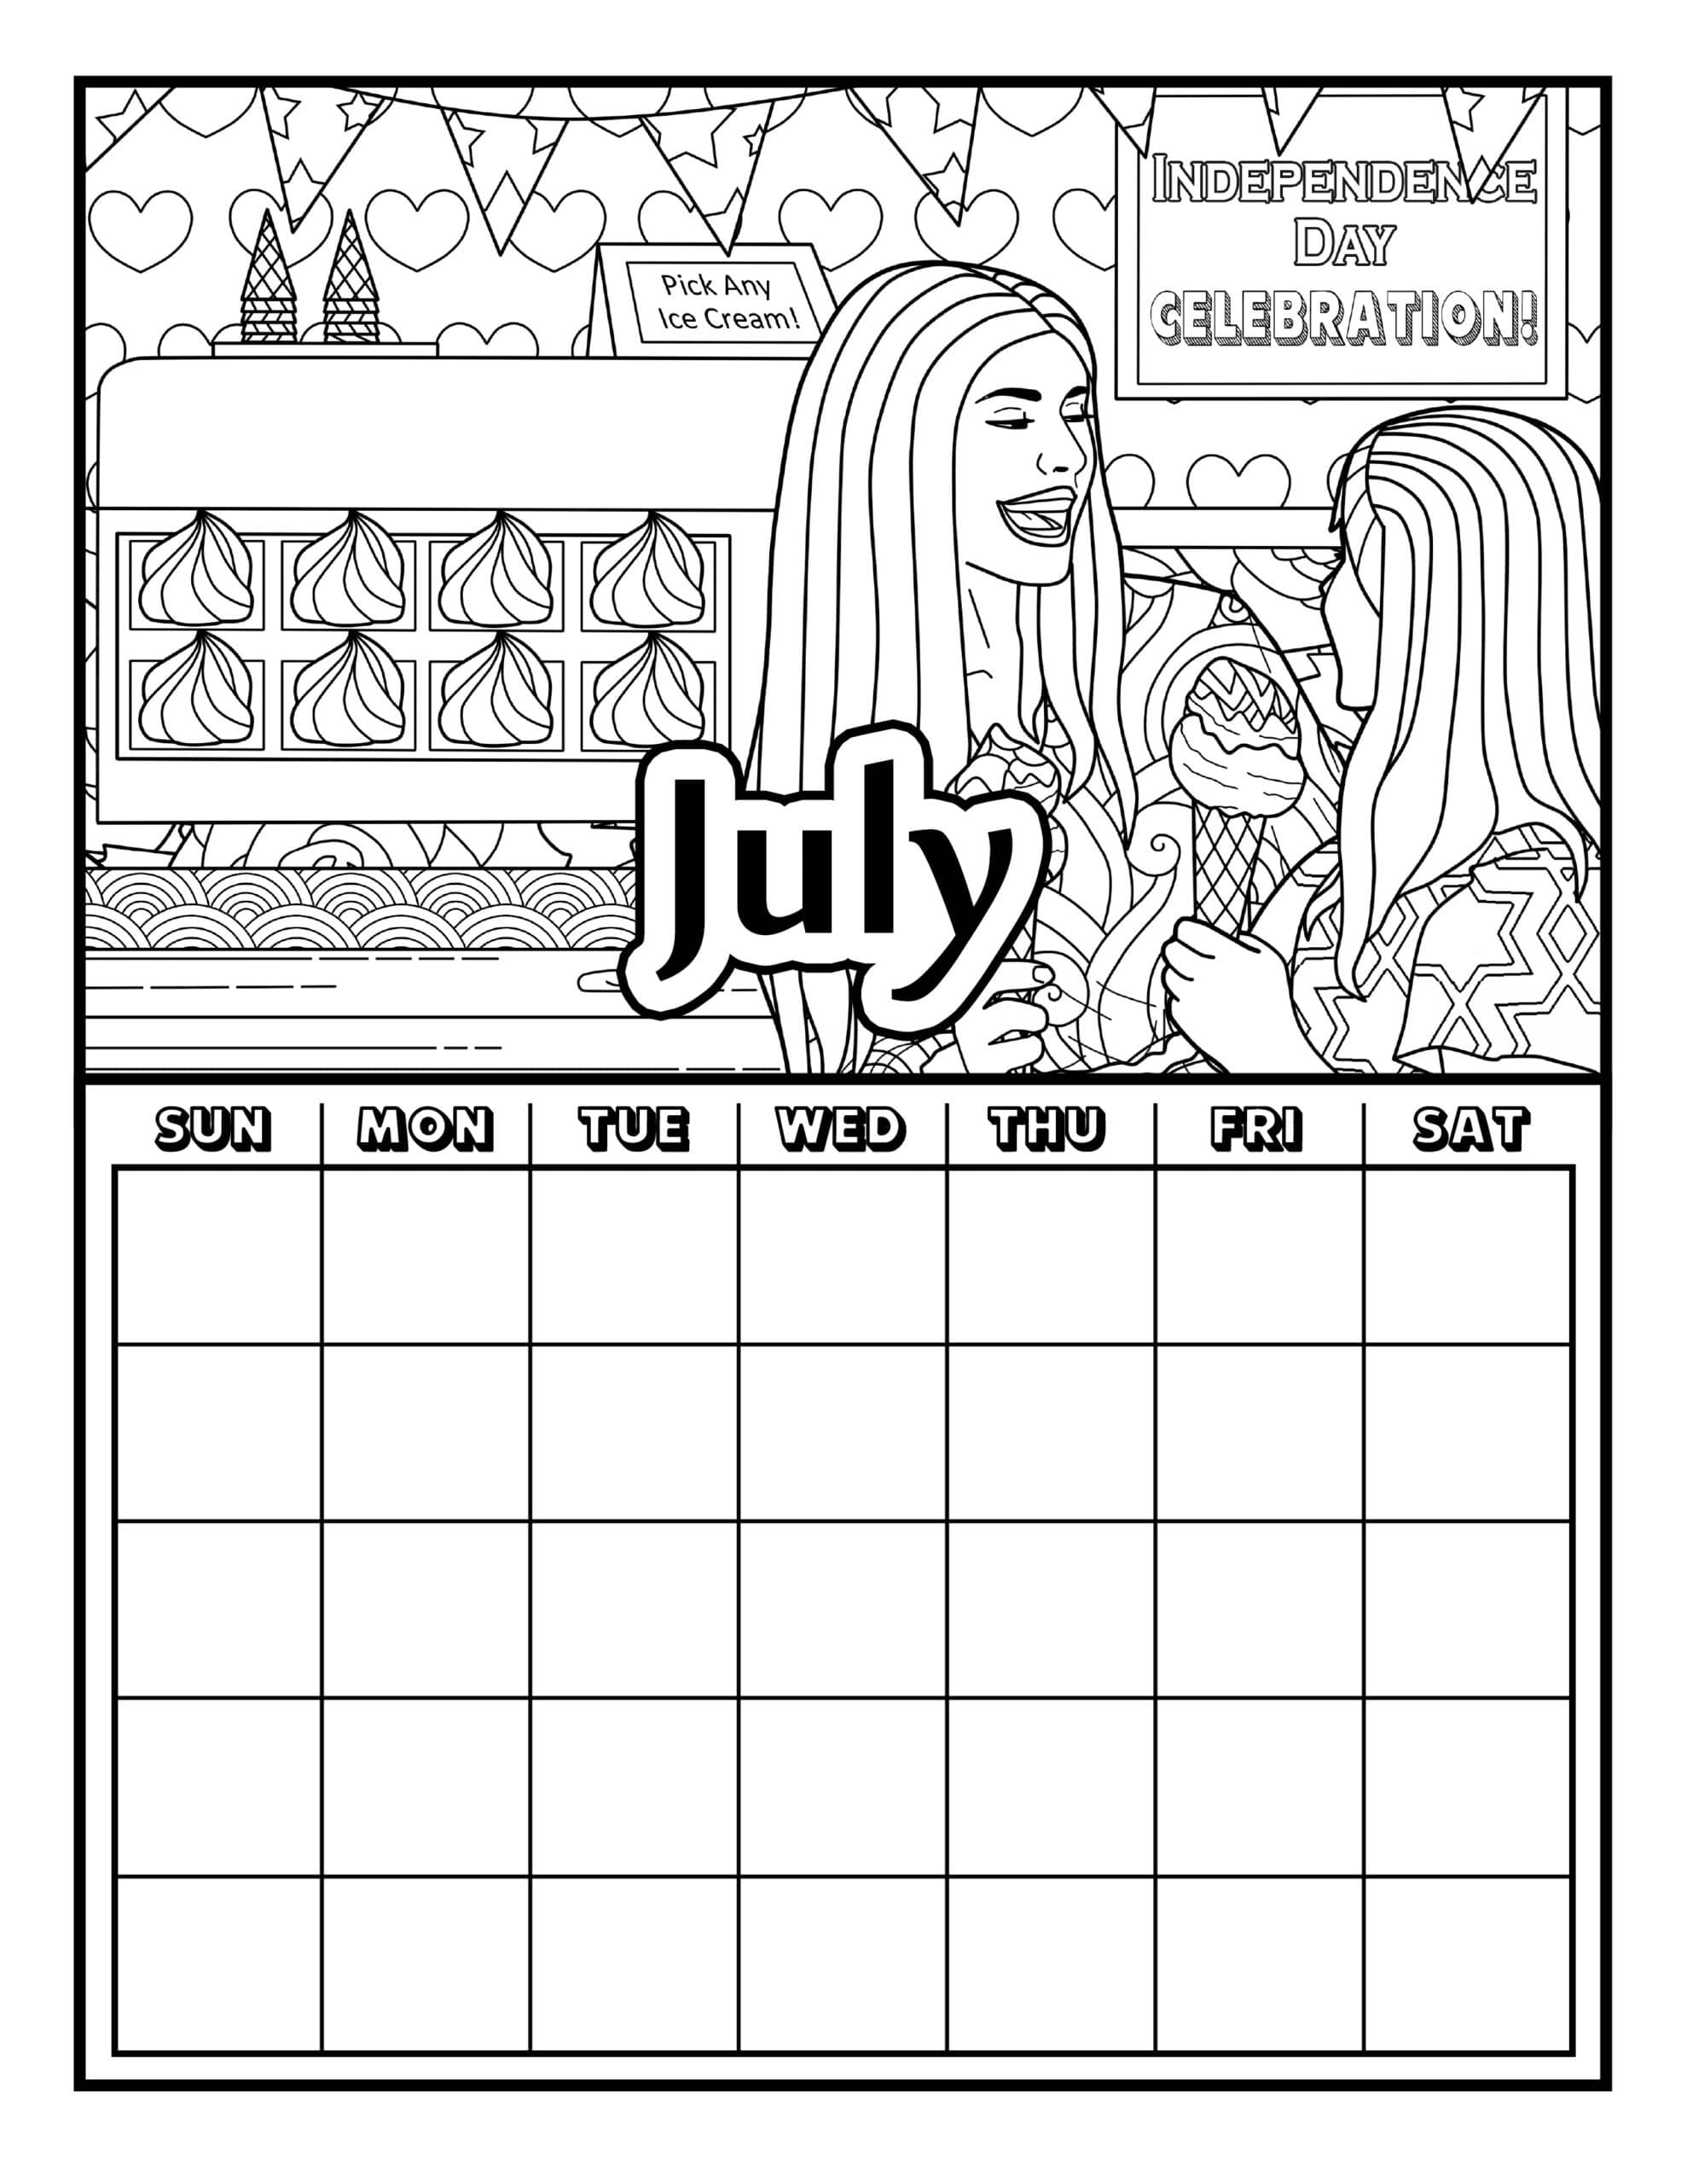 Coloring pages for july